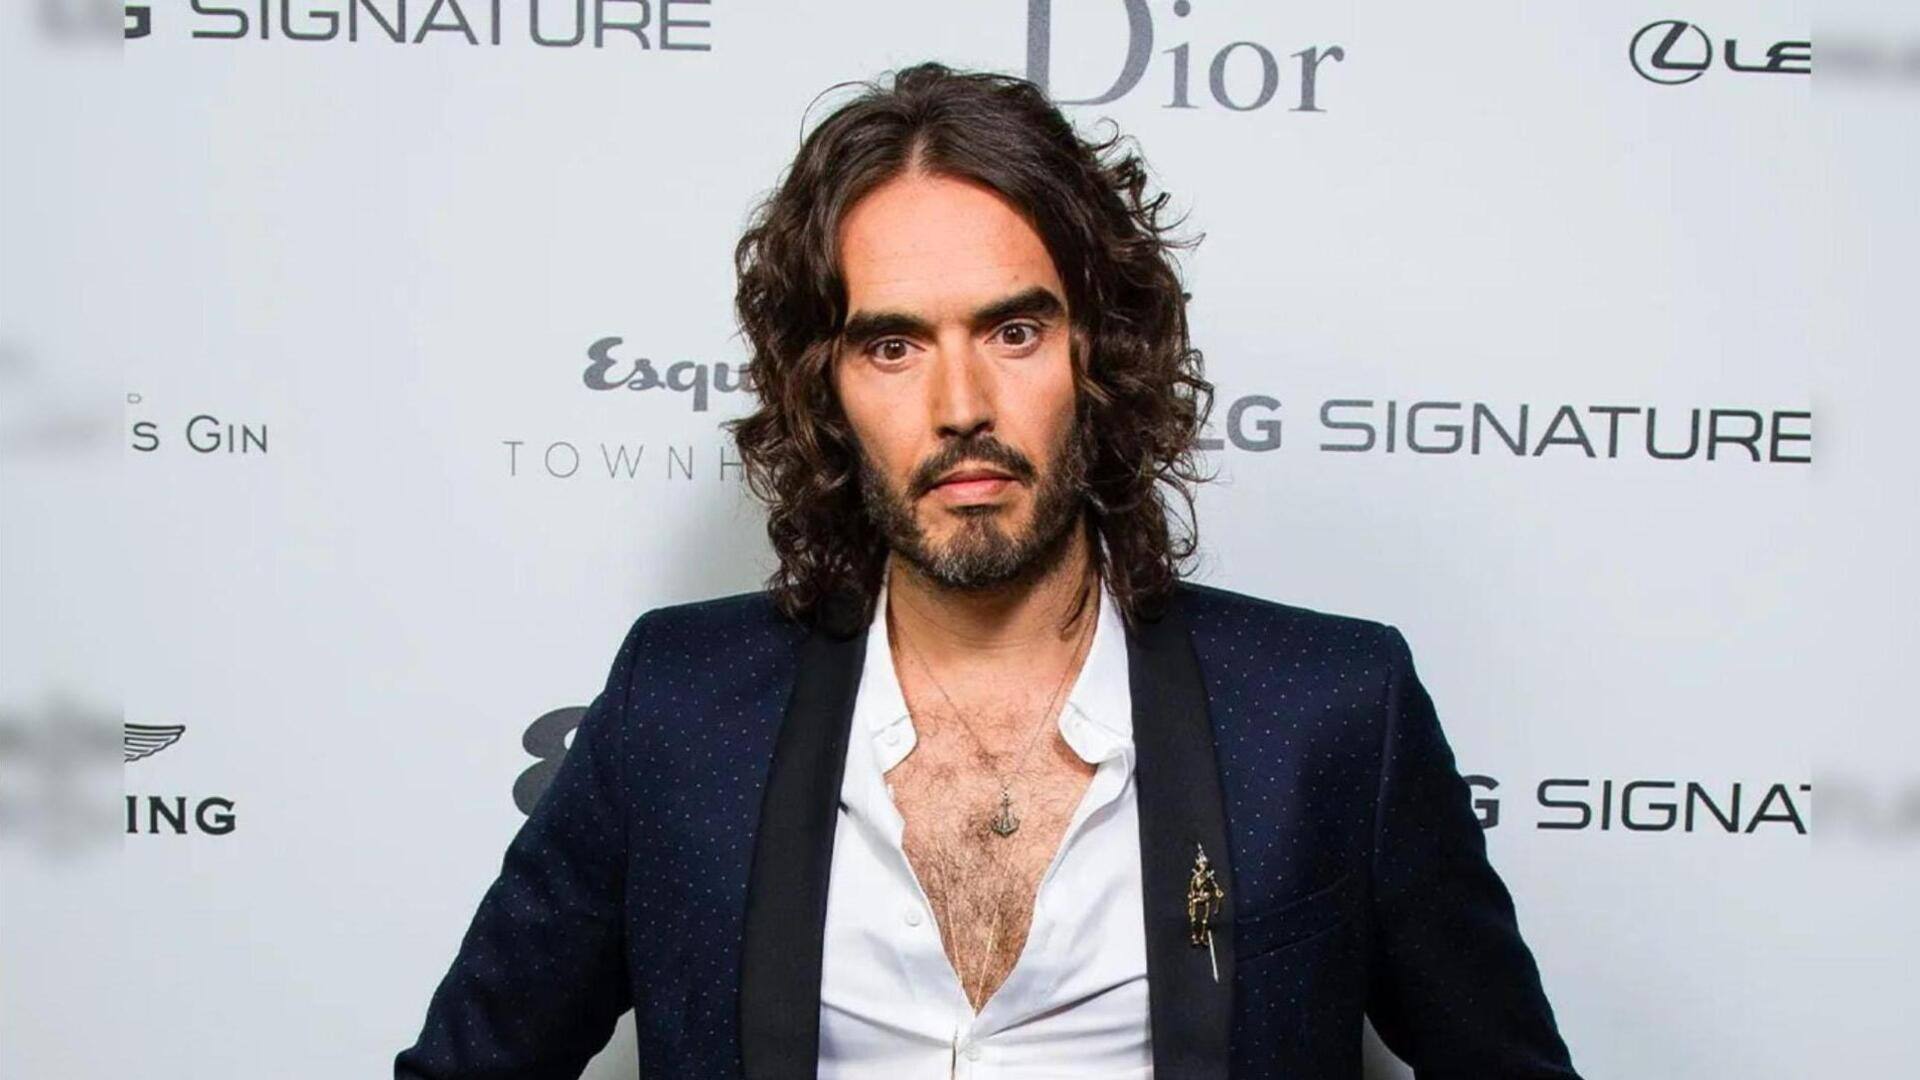 Russell Brand assault case: YouTube suspends monetization on comedian's channel